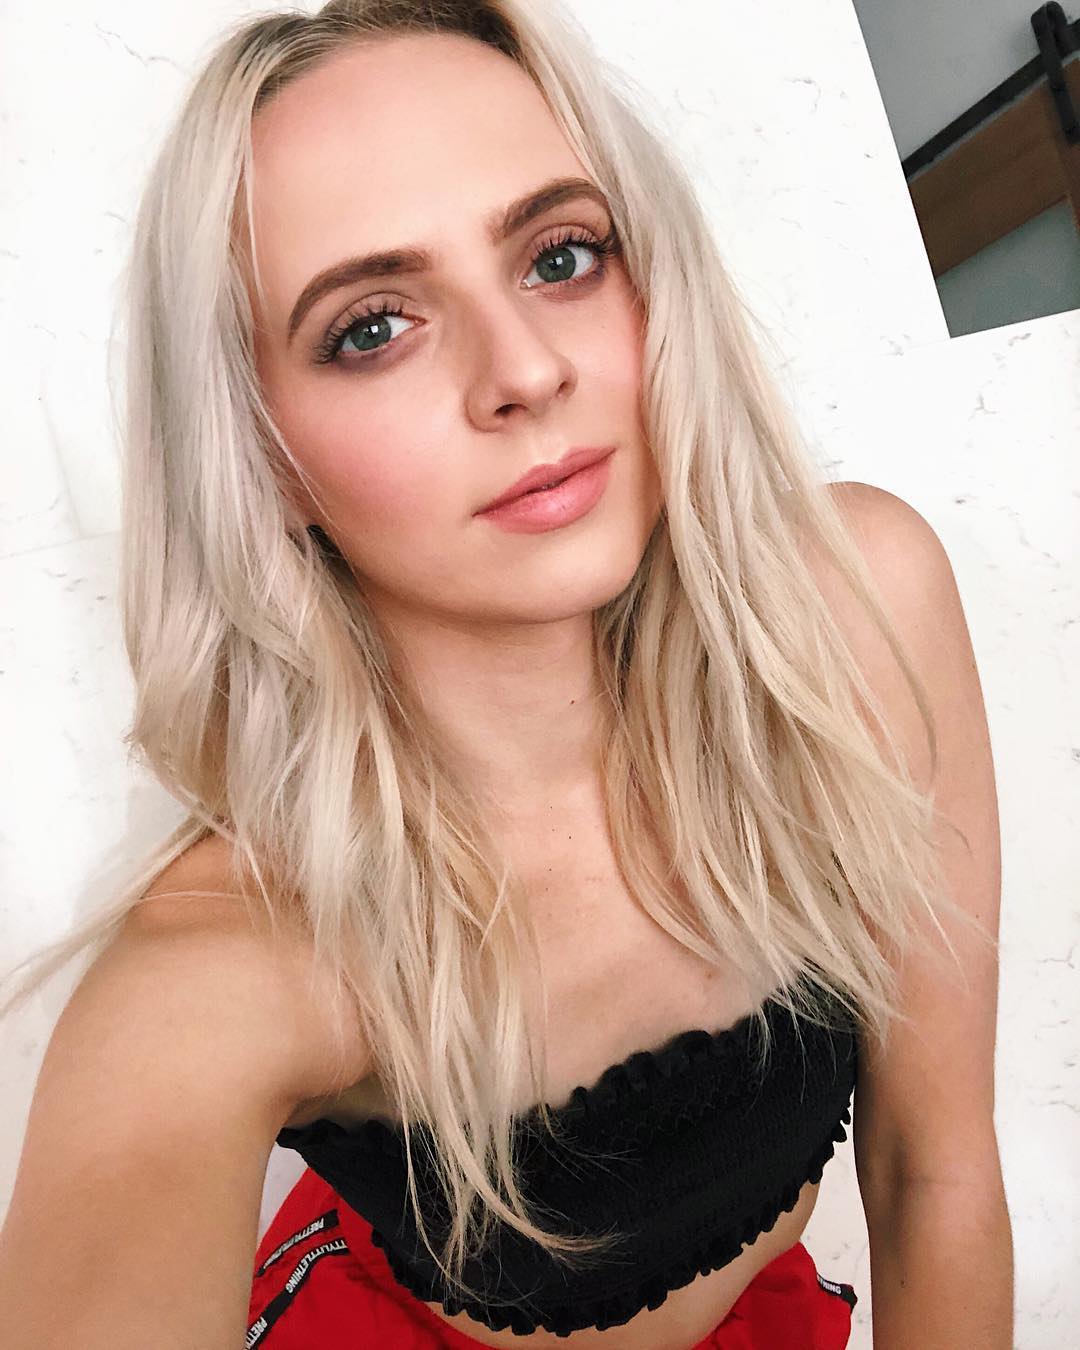 madilyn bailey hot pictures.